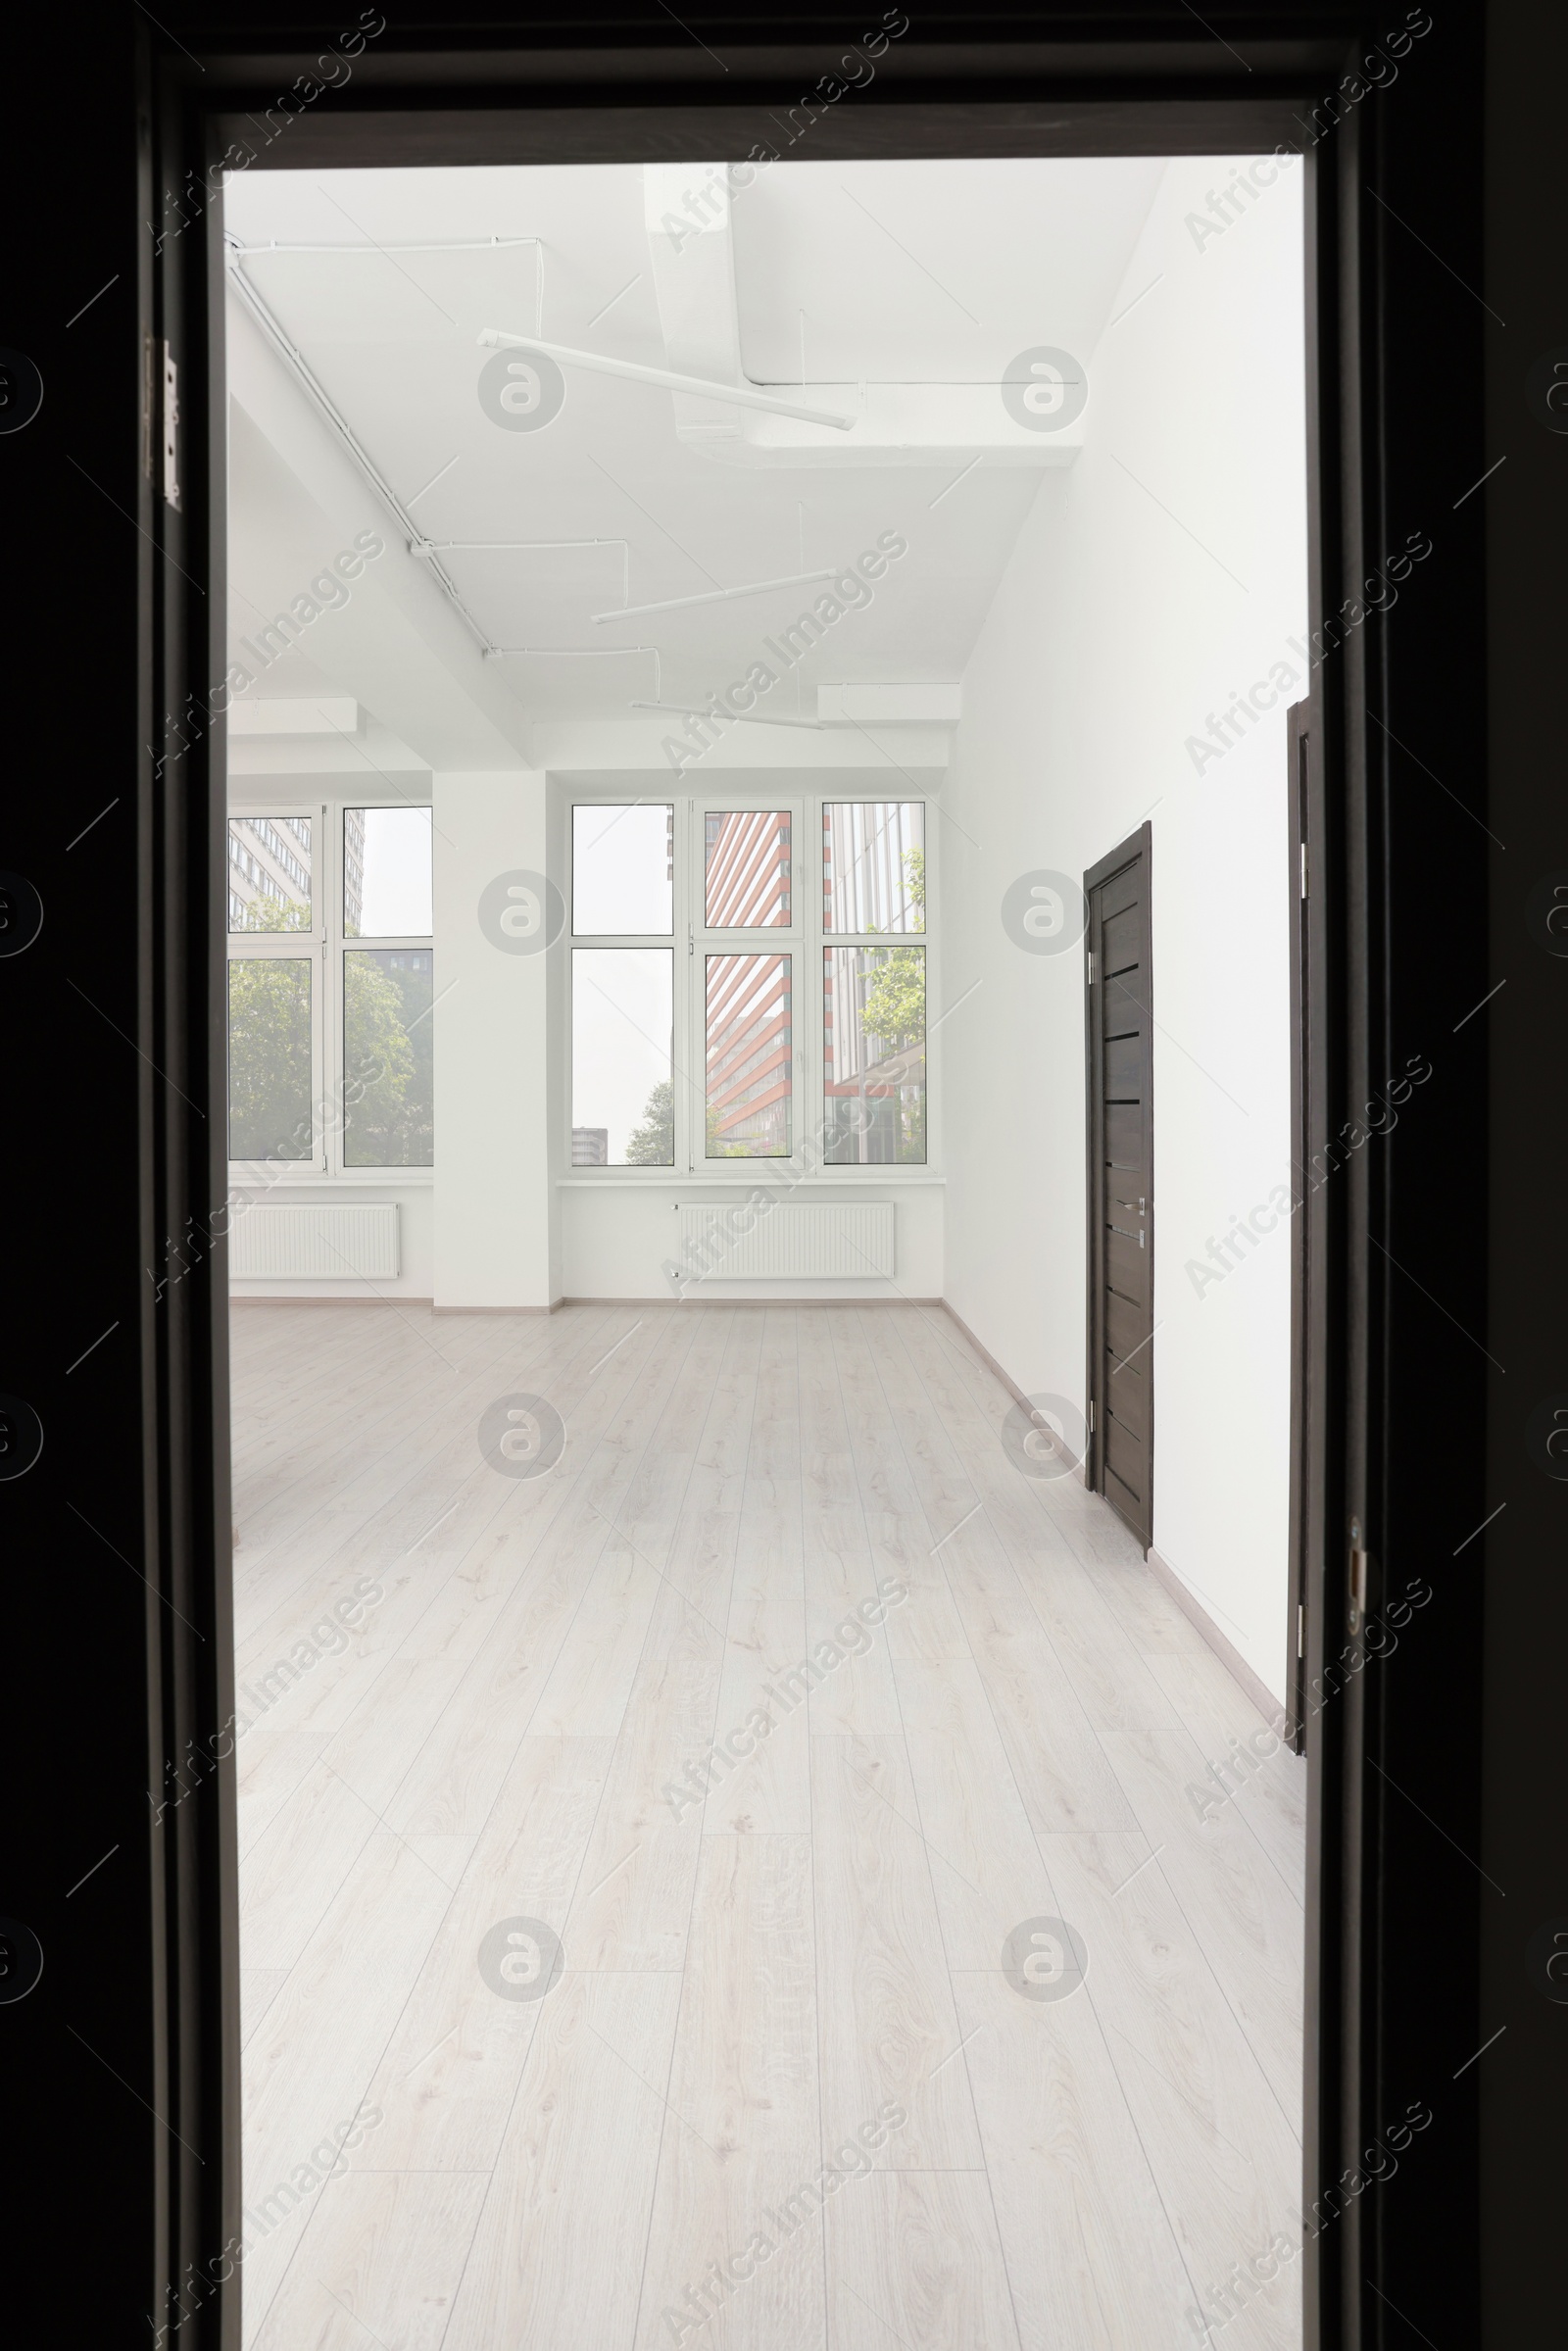 Photo of Modern office room with windows and door, view from entrance. Interior design